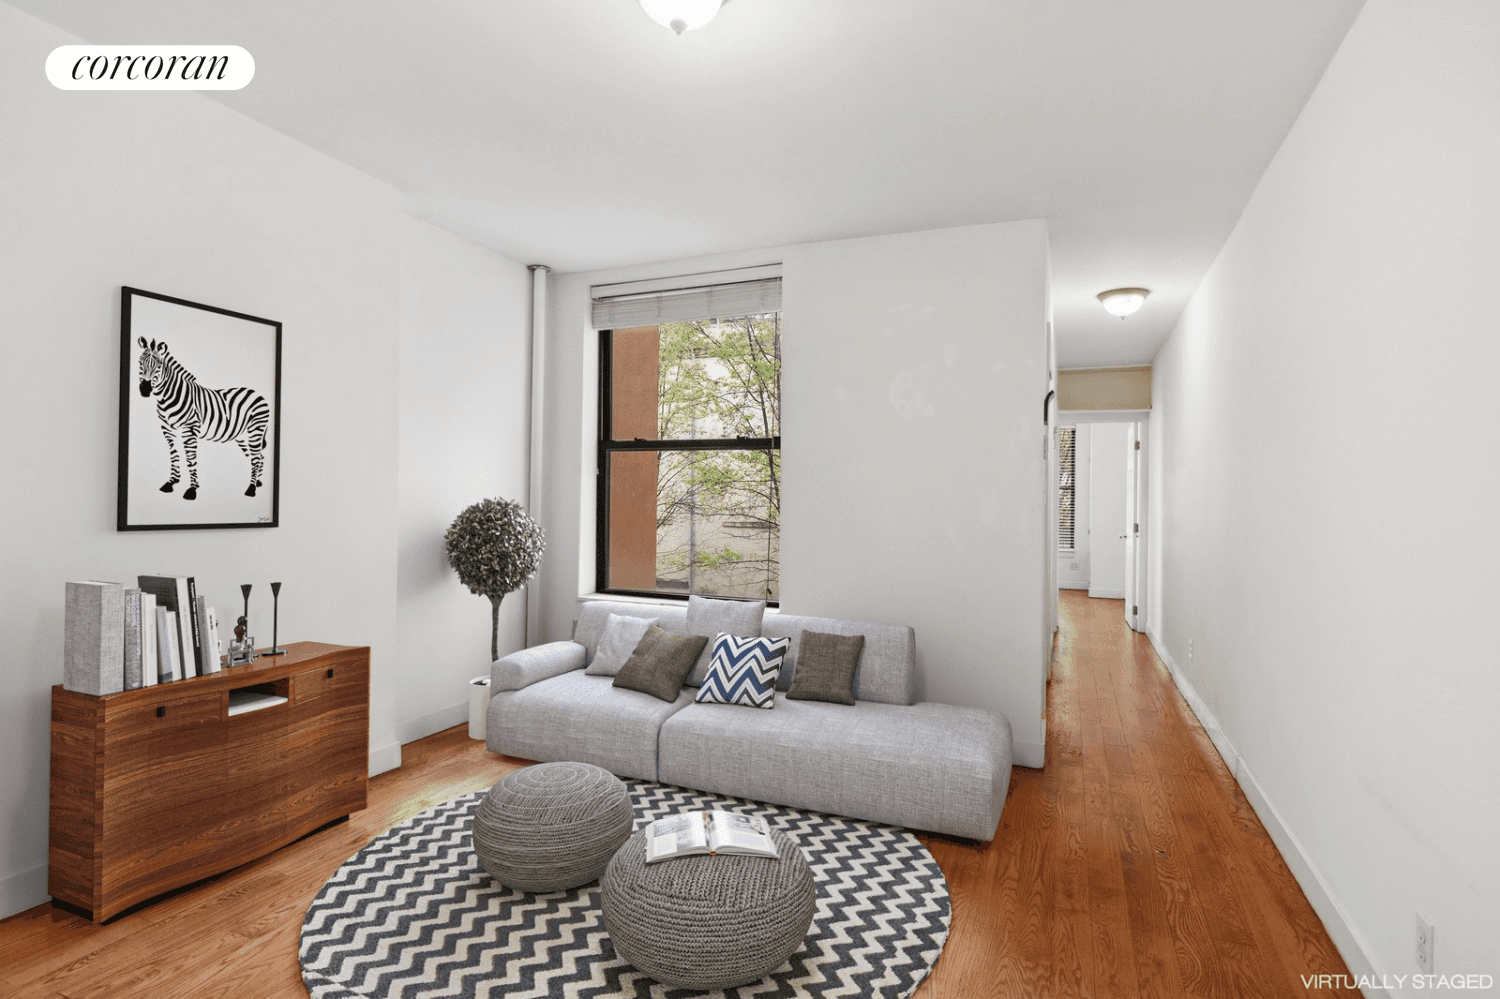 FIRST OPEN HOUSE SUNDAY 4 28 12 2 PM BY APPOINTMENT ONLYThis charming one bedroom apartment with bright western and northern exposures is an opportunity to either invest or live ...